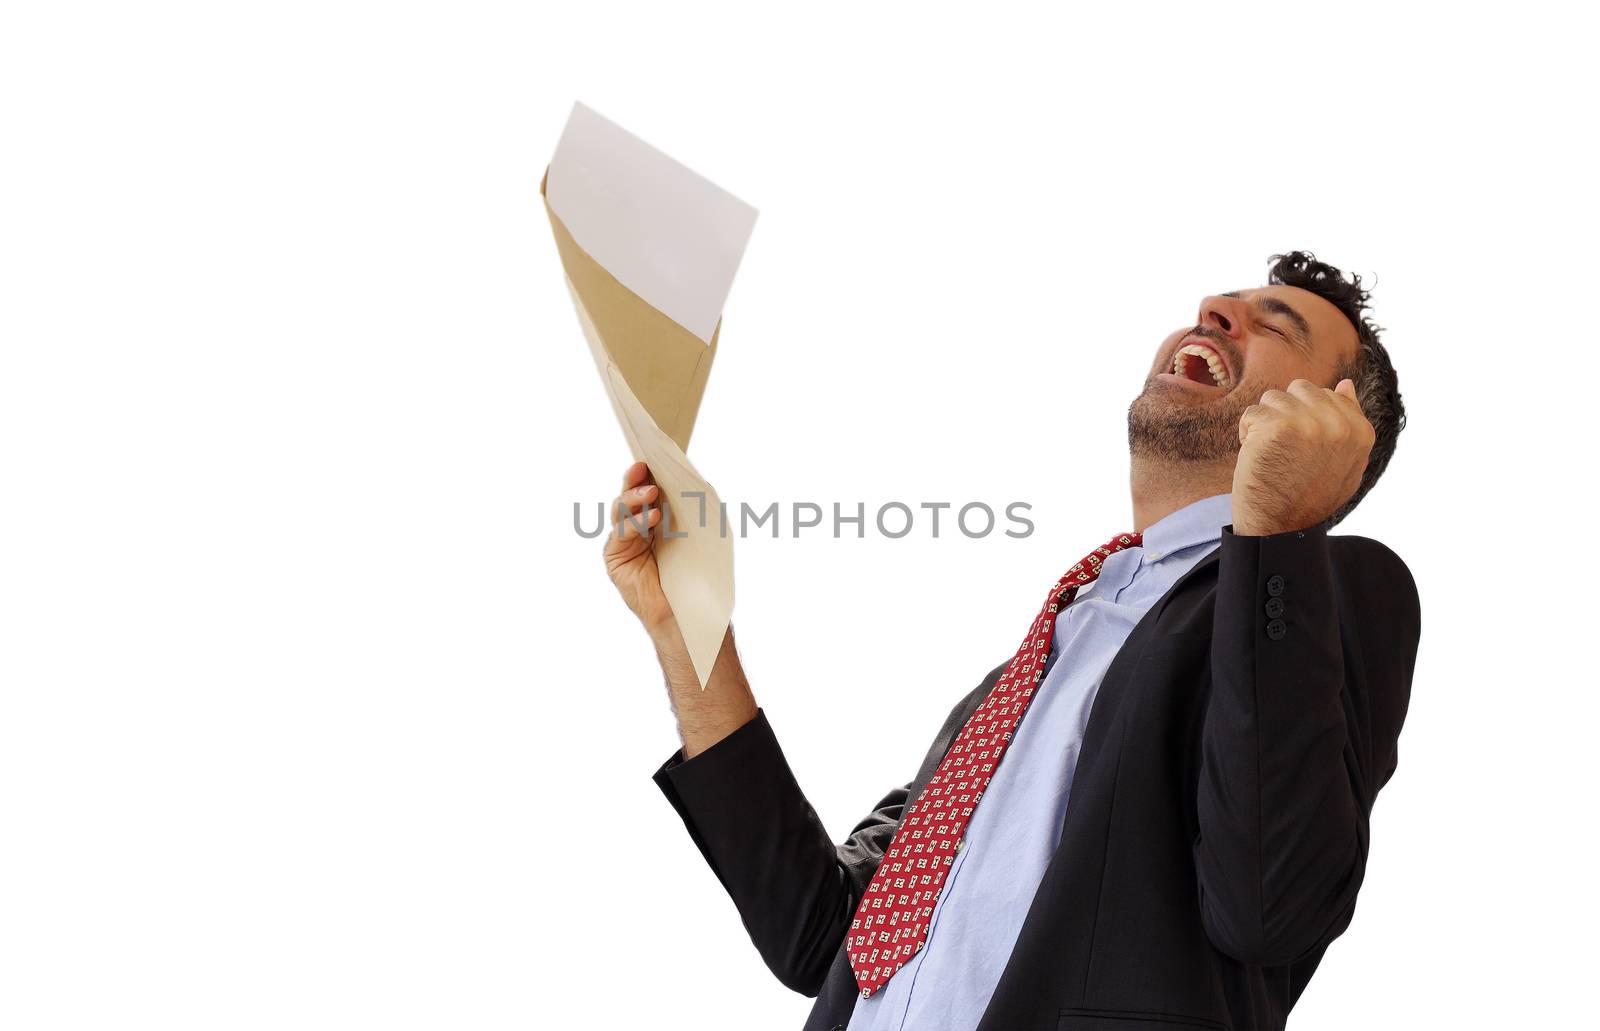 Man reacting with jubilation to a letter punching the air with his fist and cheering at his success, isolated on white